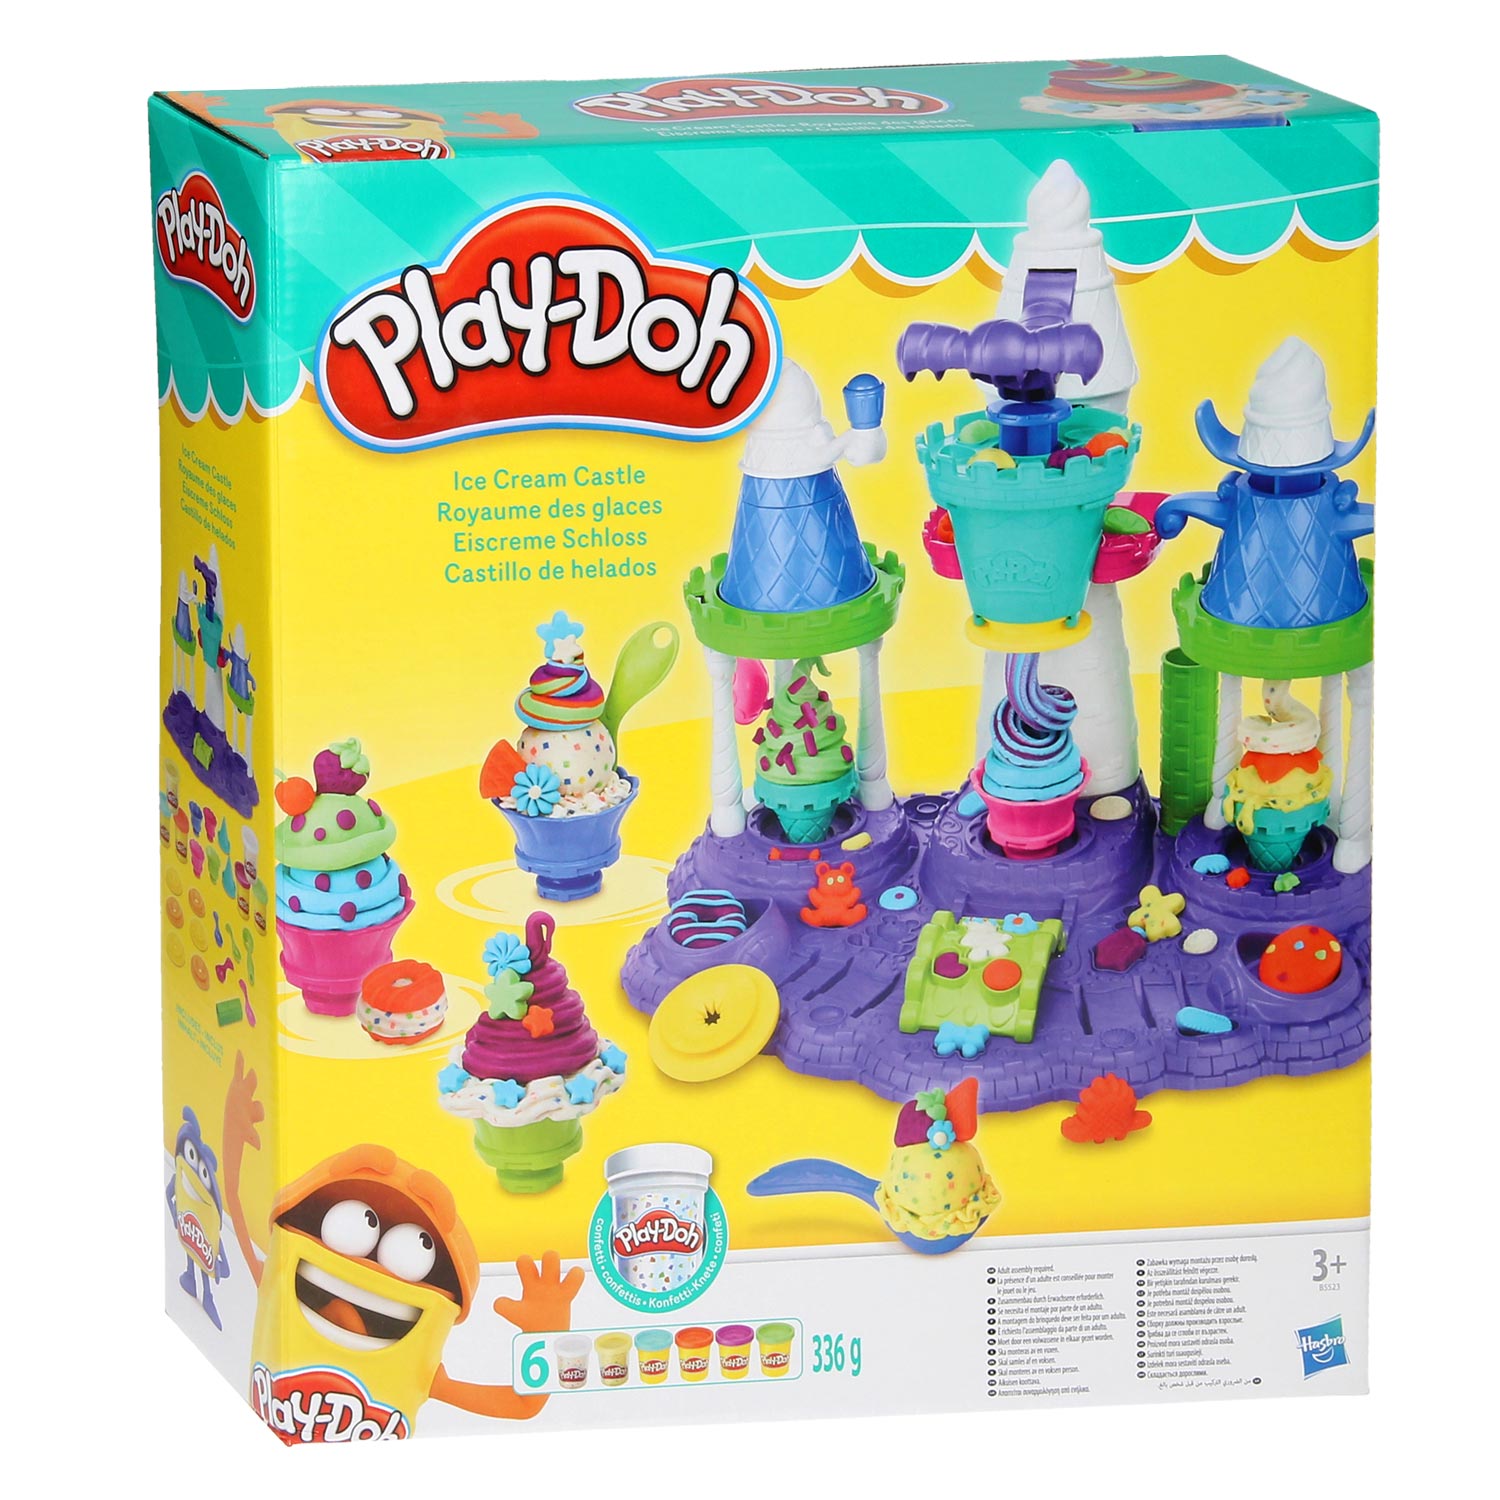 Play-Doh 4 Pack Wild Colors